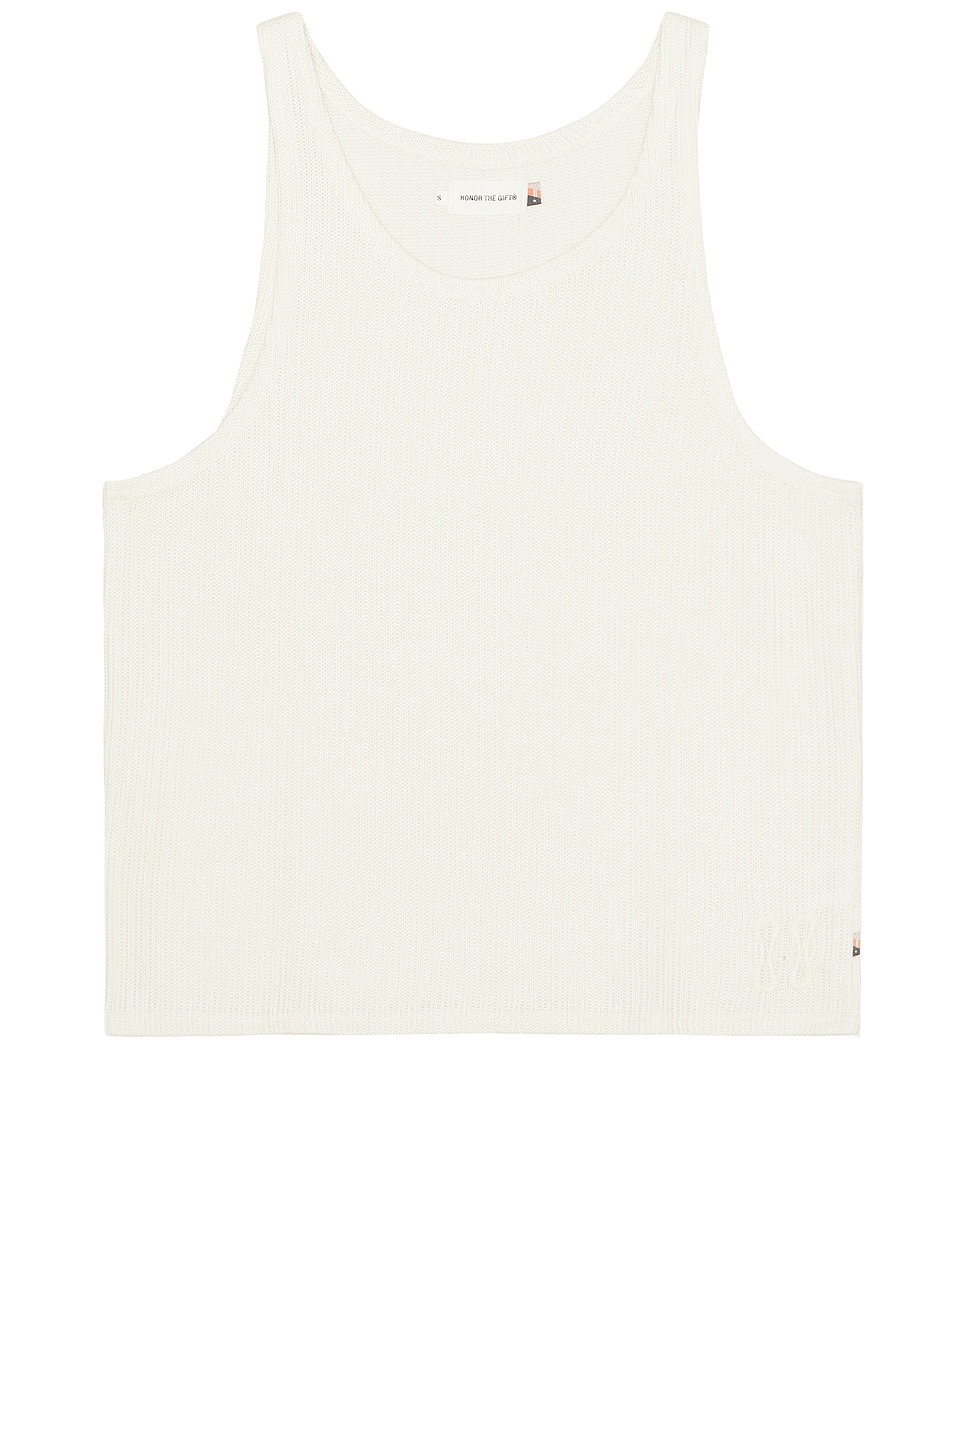 Image 1 of Honor The Gift Knit Tank Top in Bone